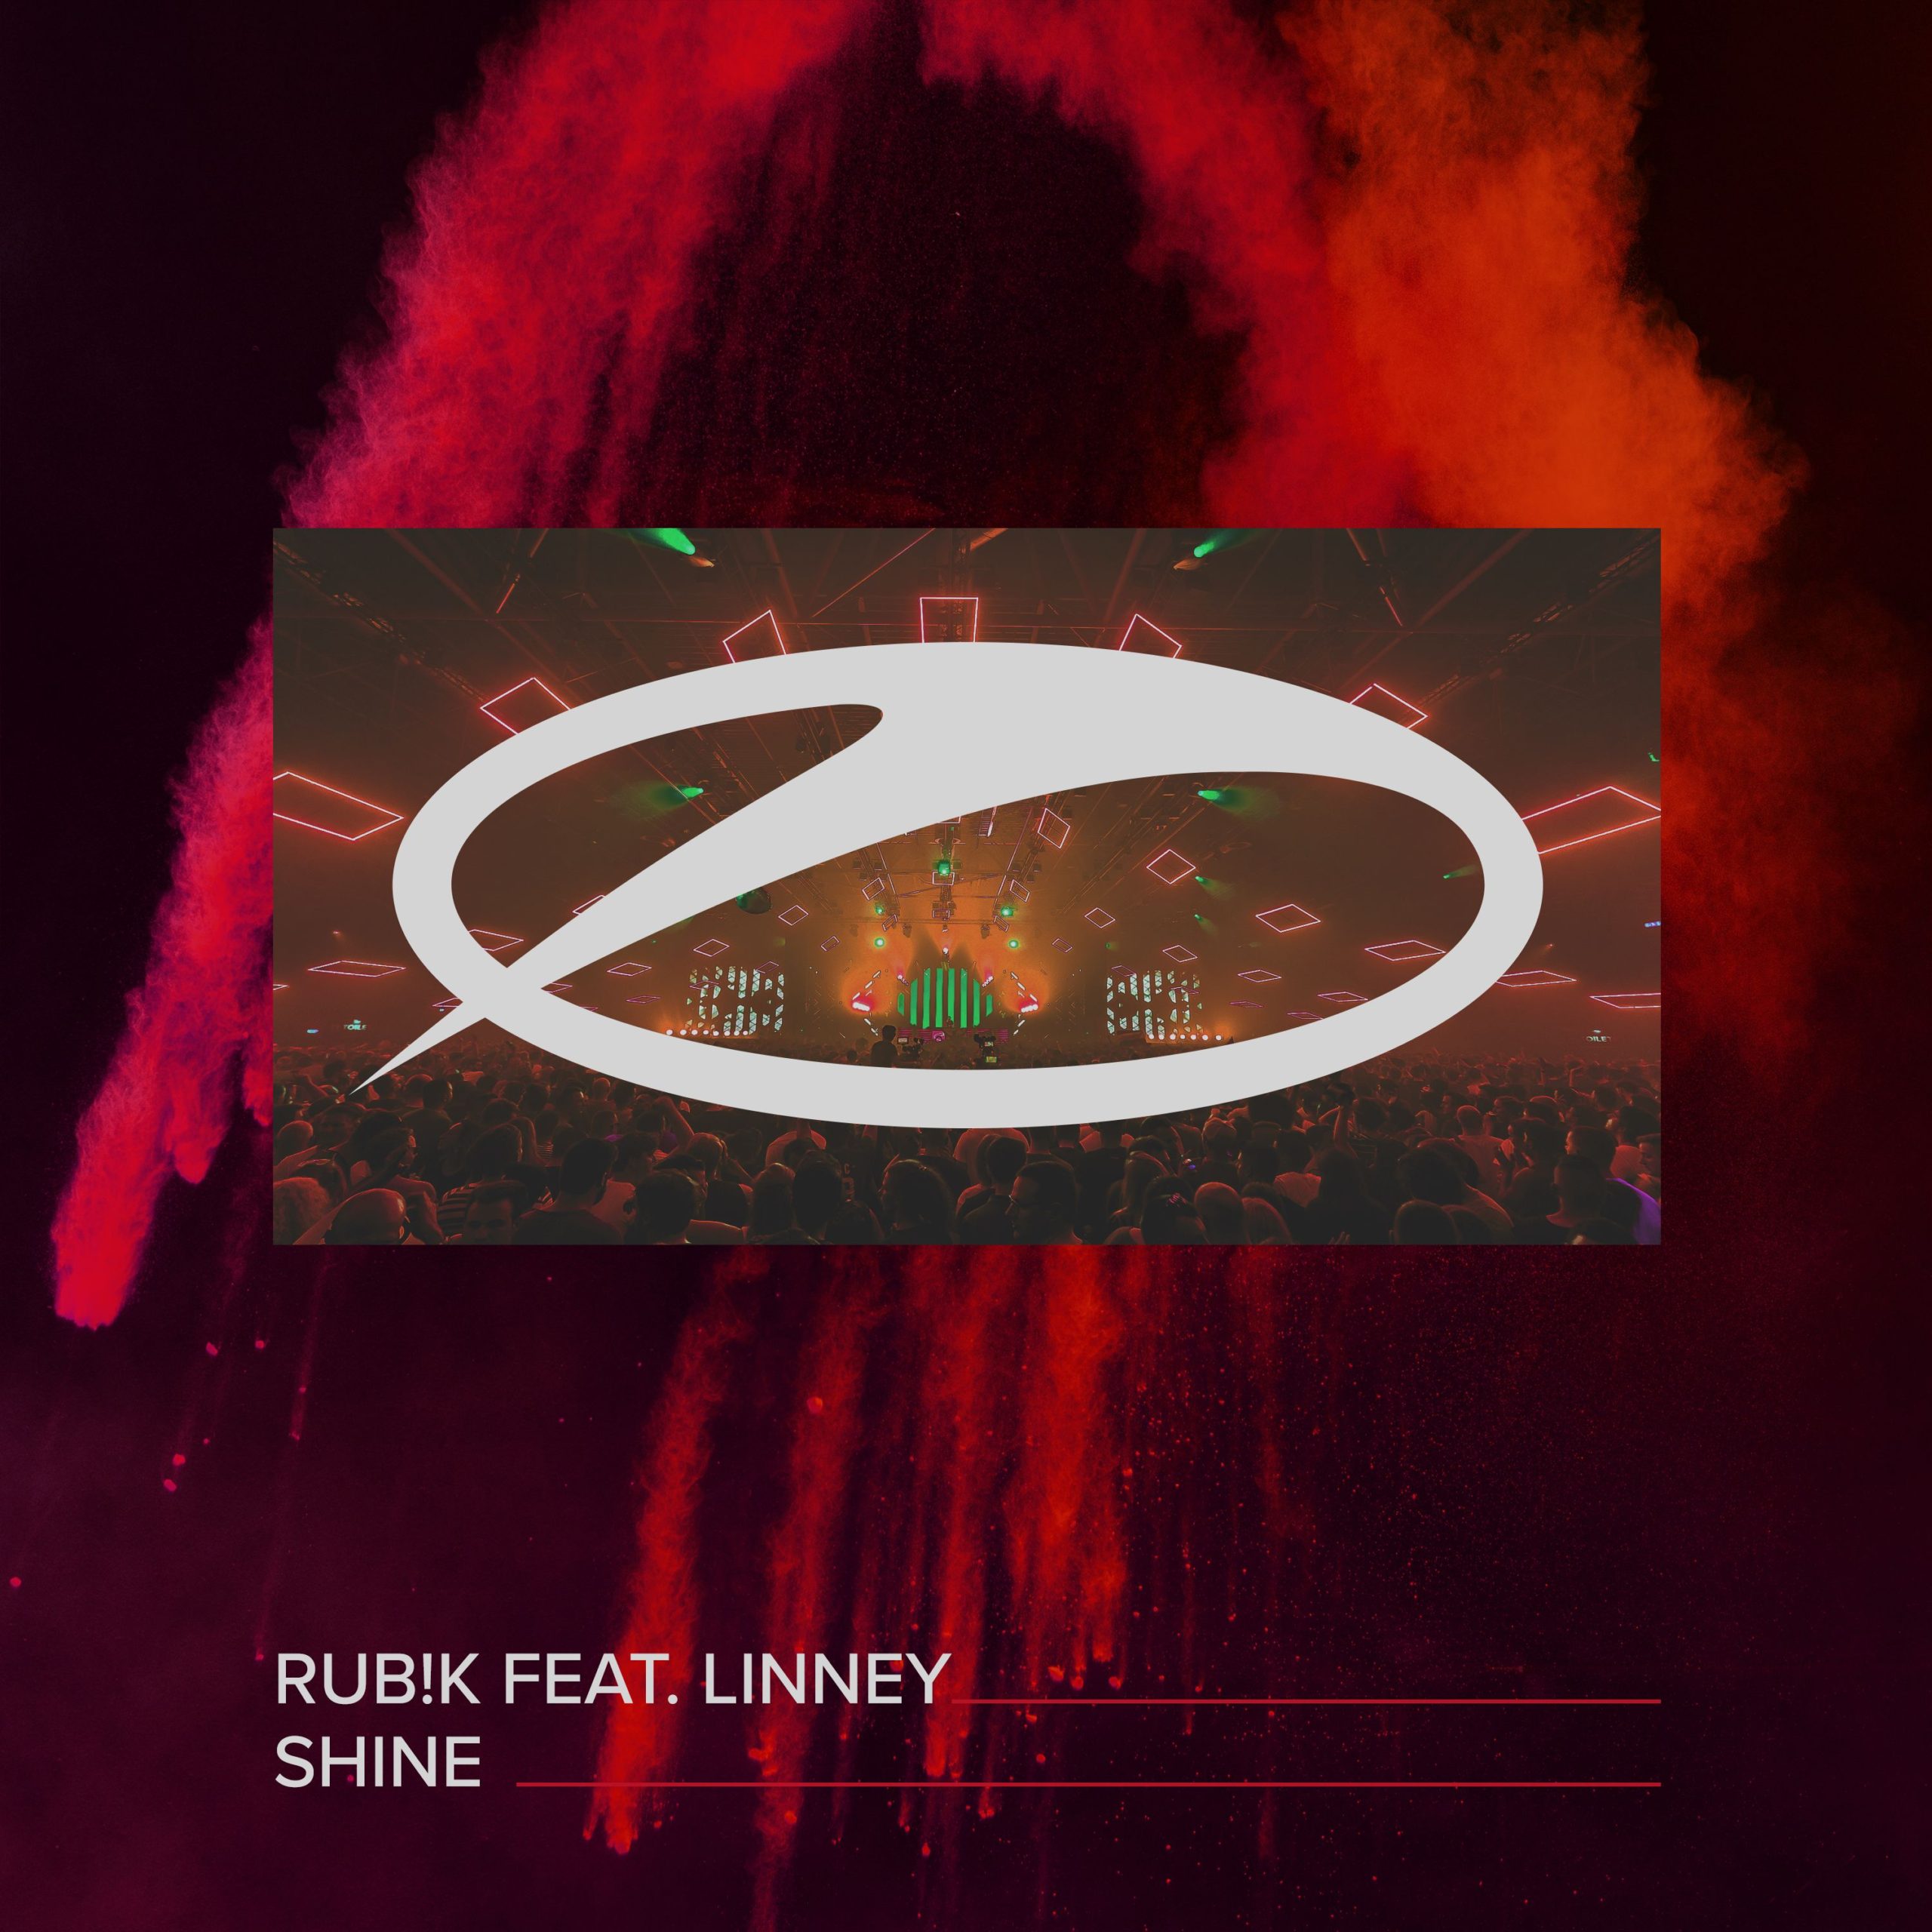 Rub!k feat. Linney presents Shine on A State Of Trance